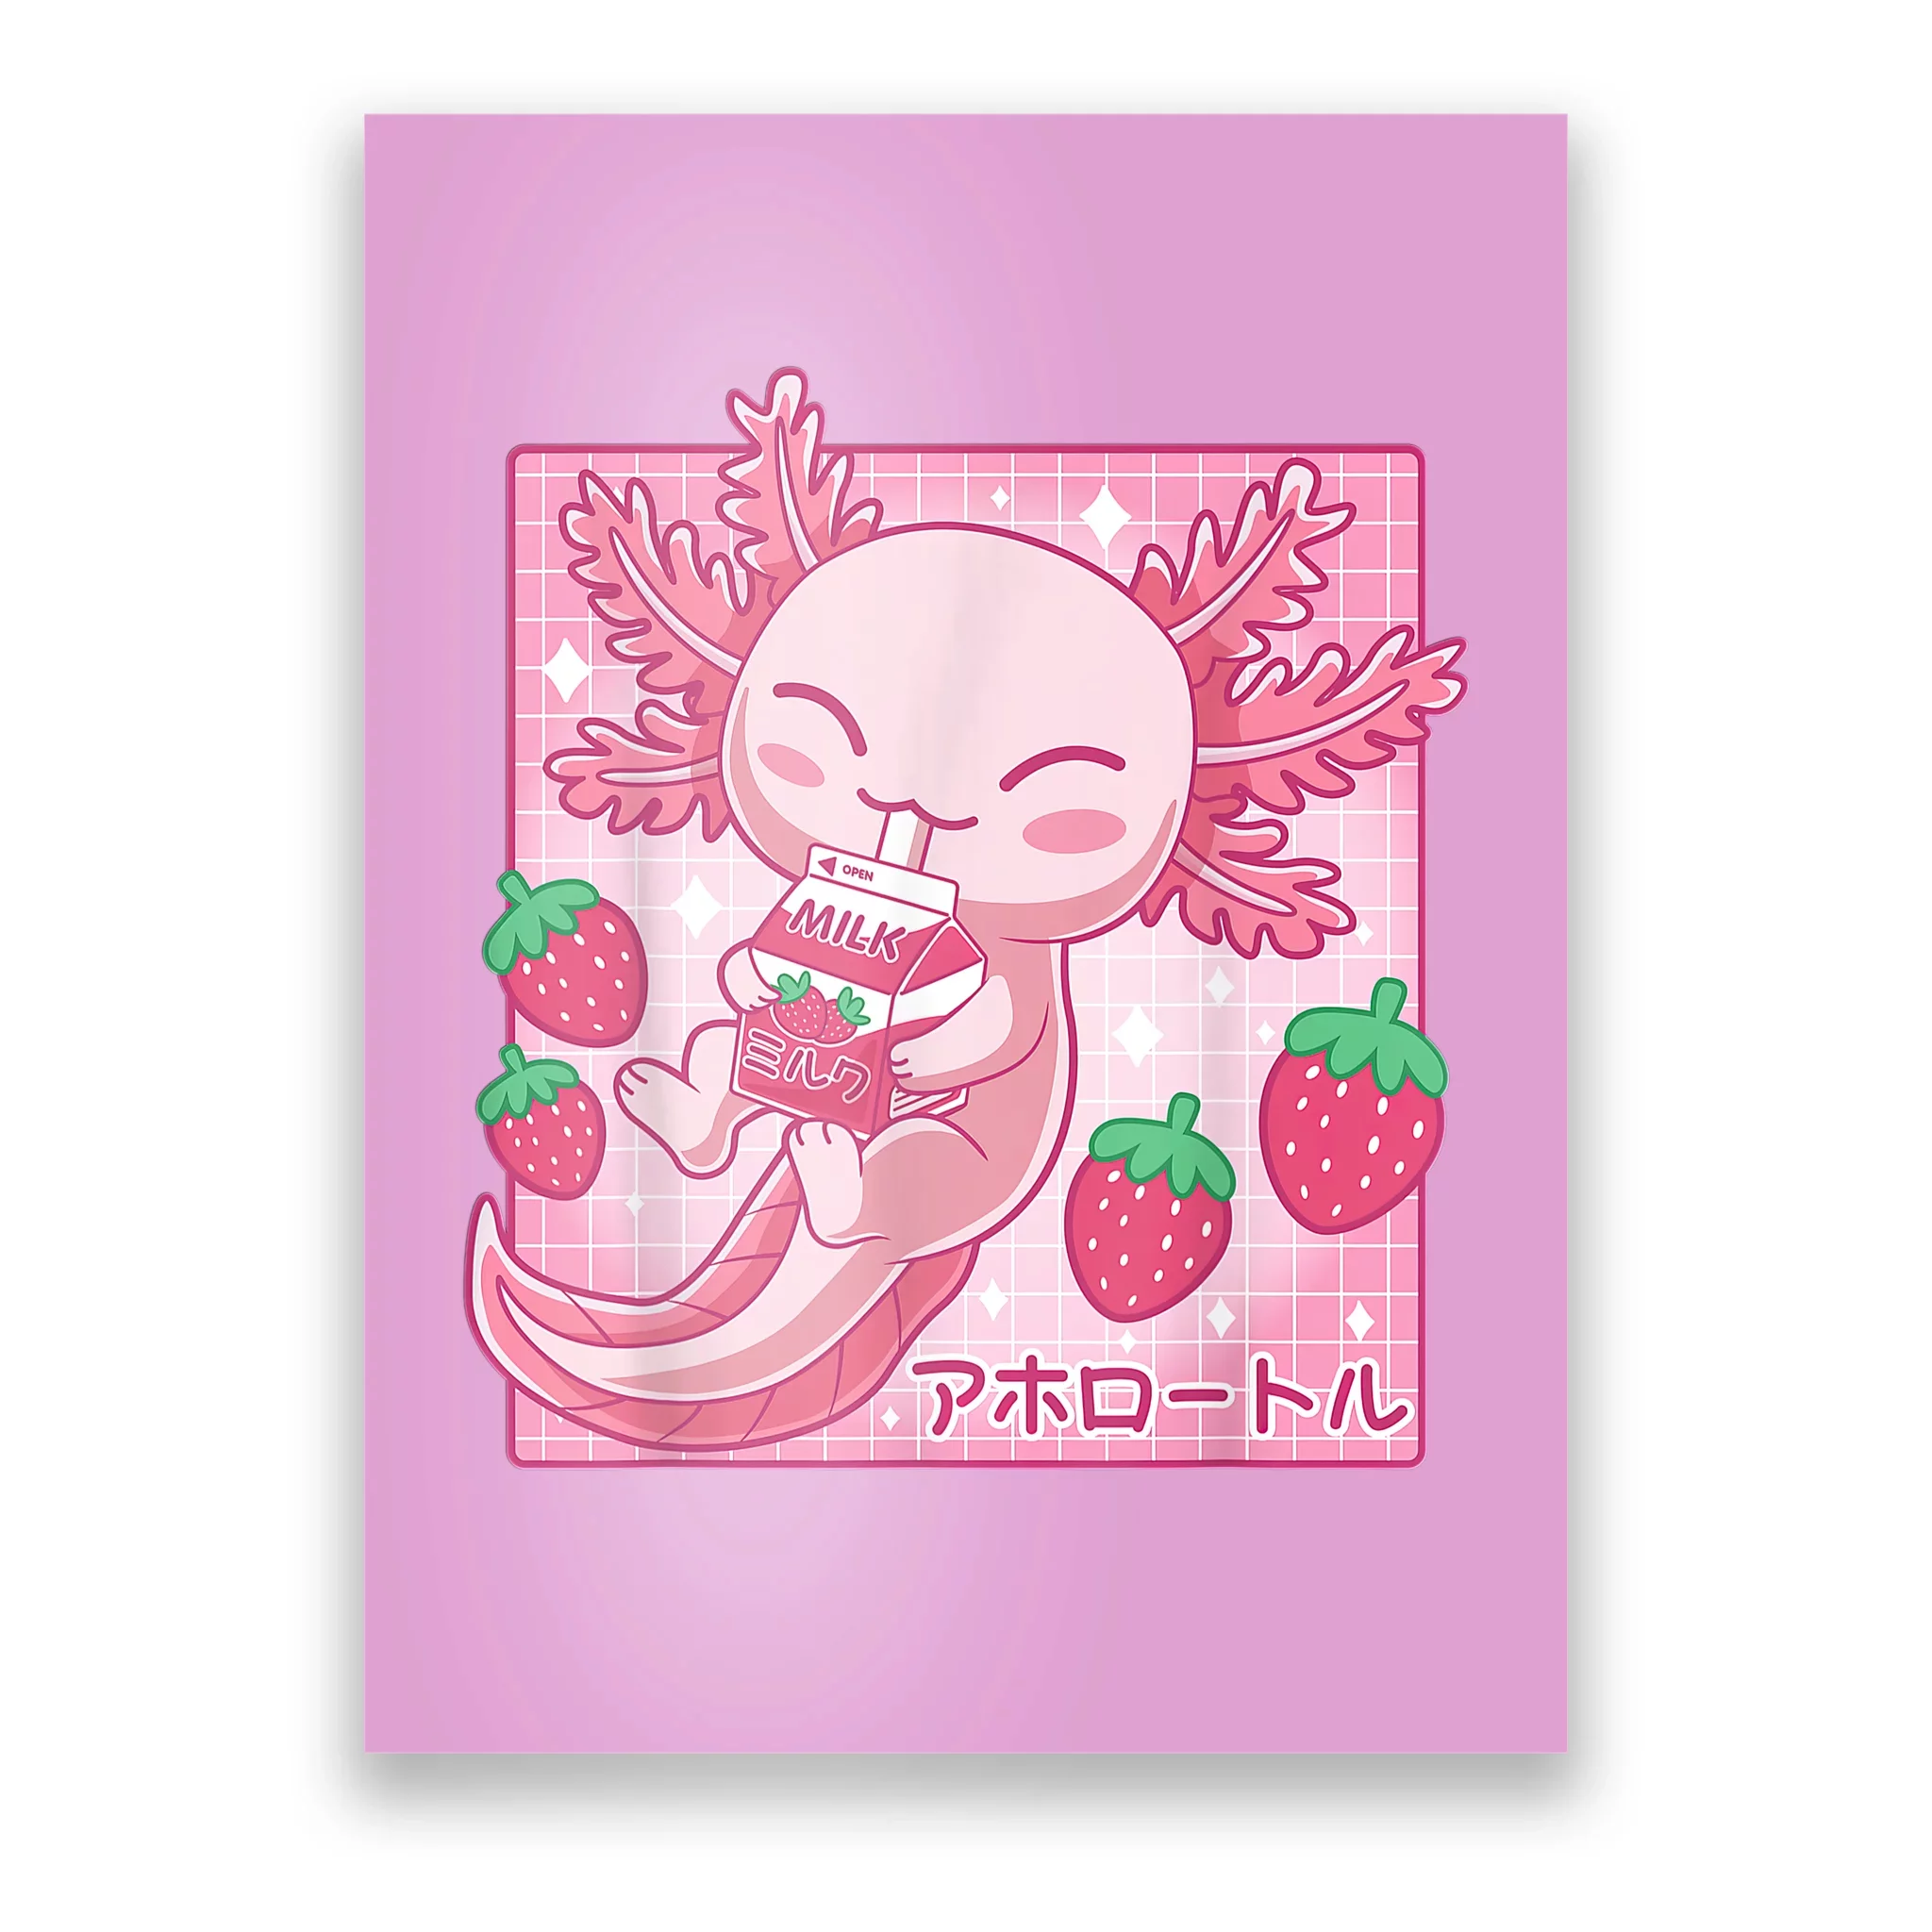 Funny Bobaxolotl Boba Tea Bubble Milk Kawaii Axolotl Anime Journal  Notebook: Lined 6x9 120 Pages Notebook, Cute Anime Girl Diary Or Notepad  For Sketching And Writing, Gift For All Anime Lovers: Reux,